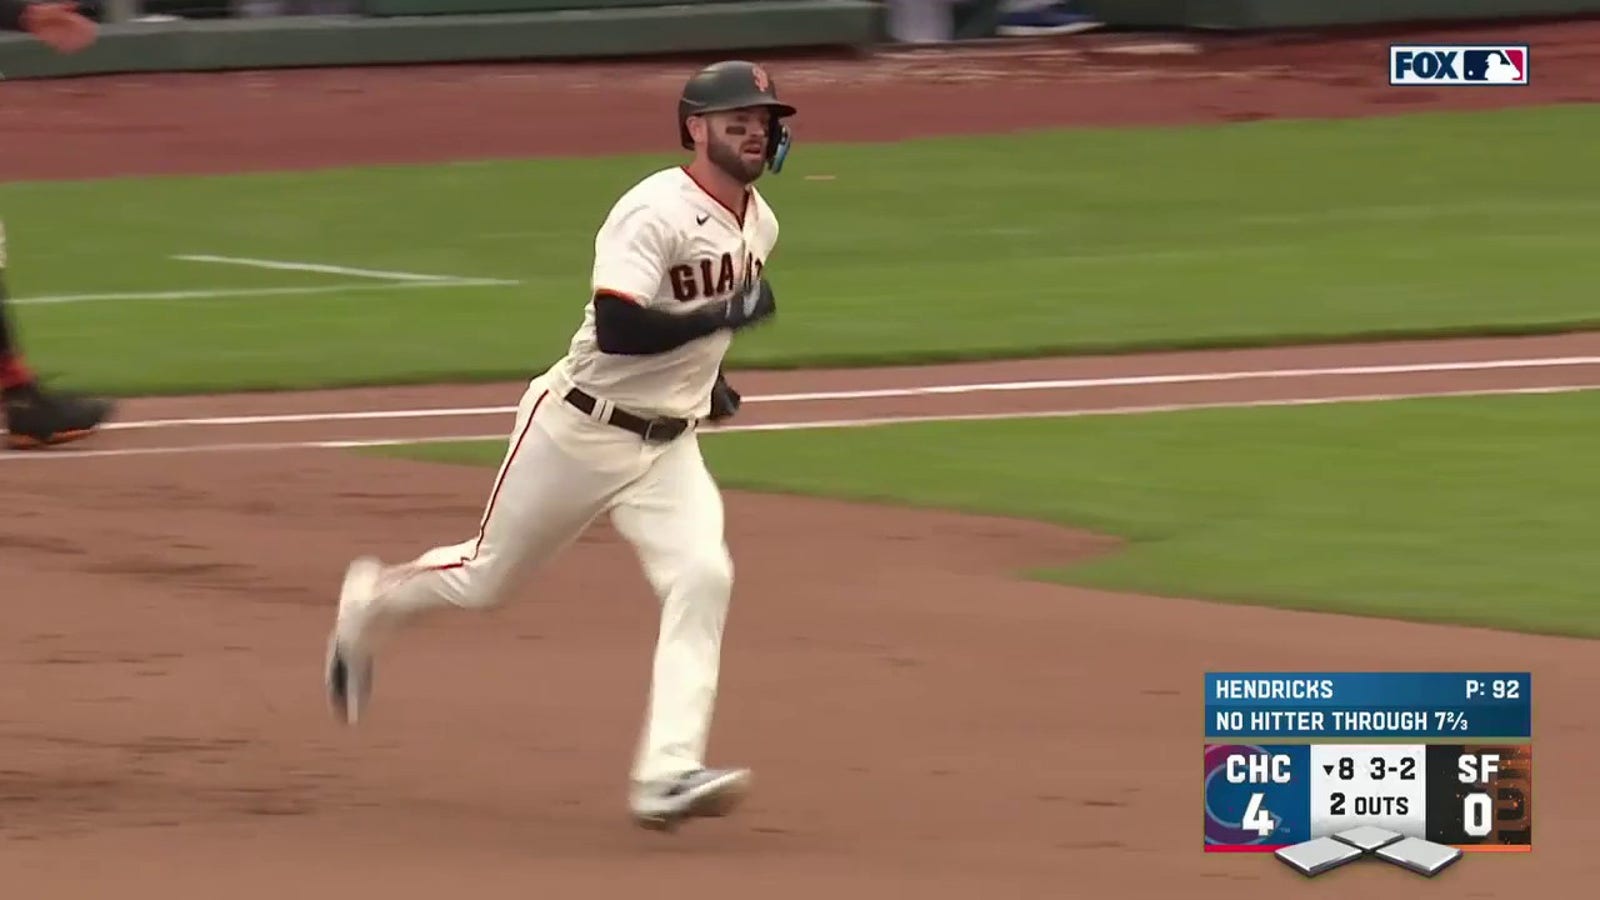 Giants' Mitch Haniger breaks Cubs' Kyle Hendricks' no-hitter in the eighth with a double